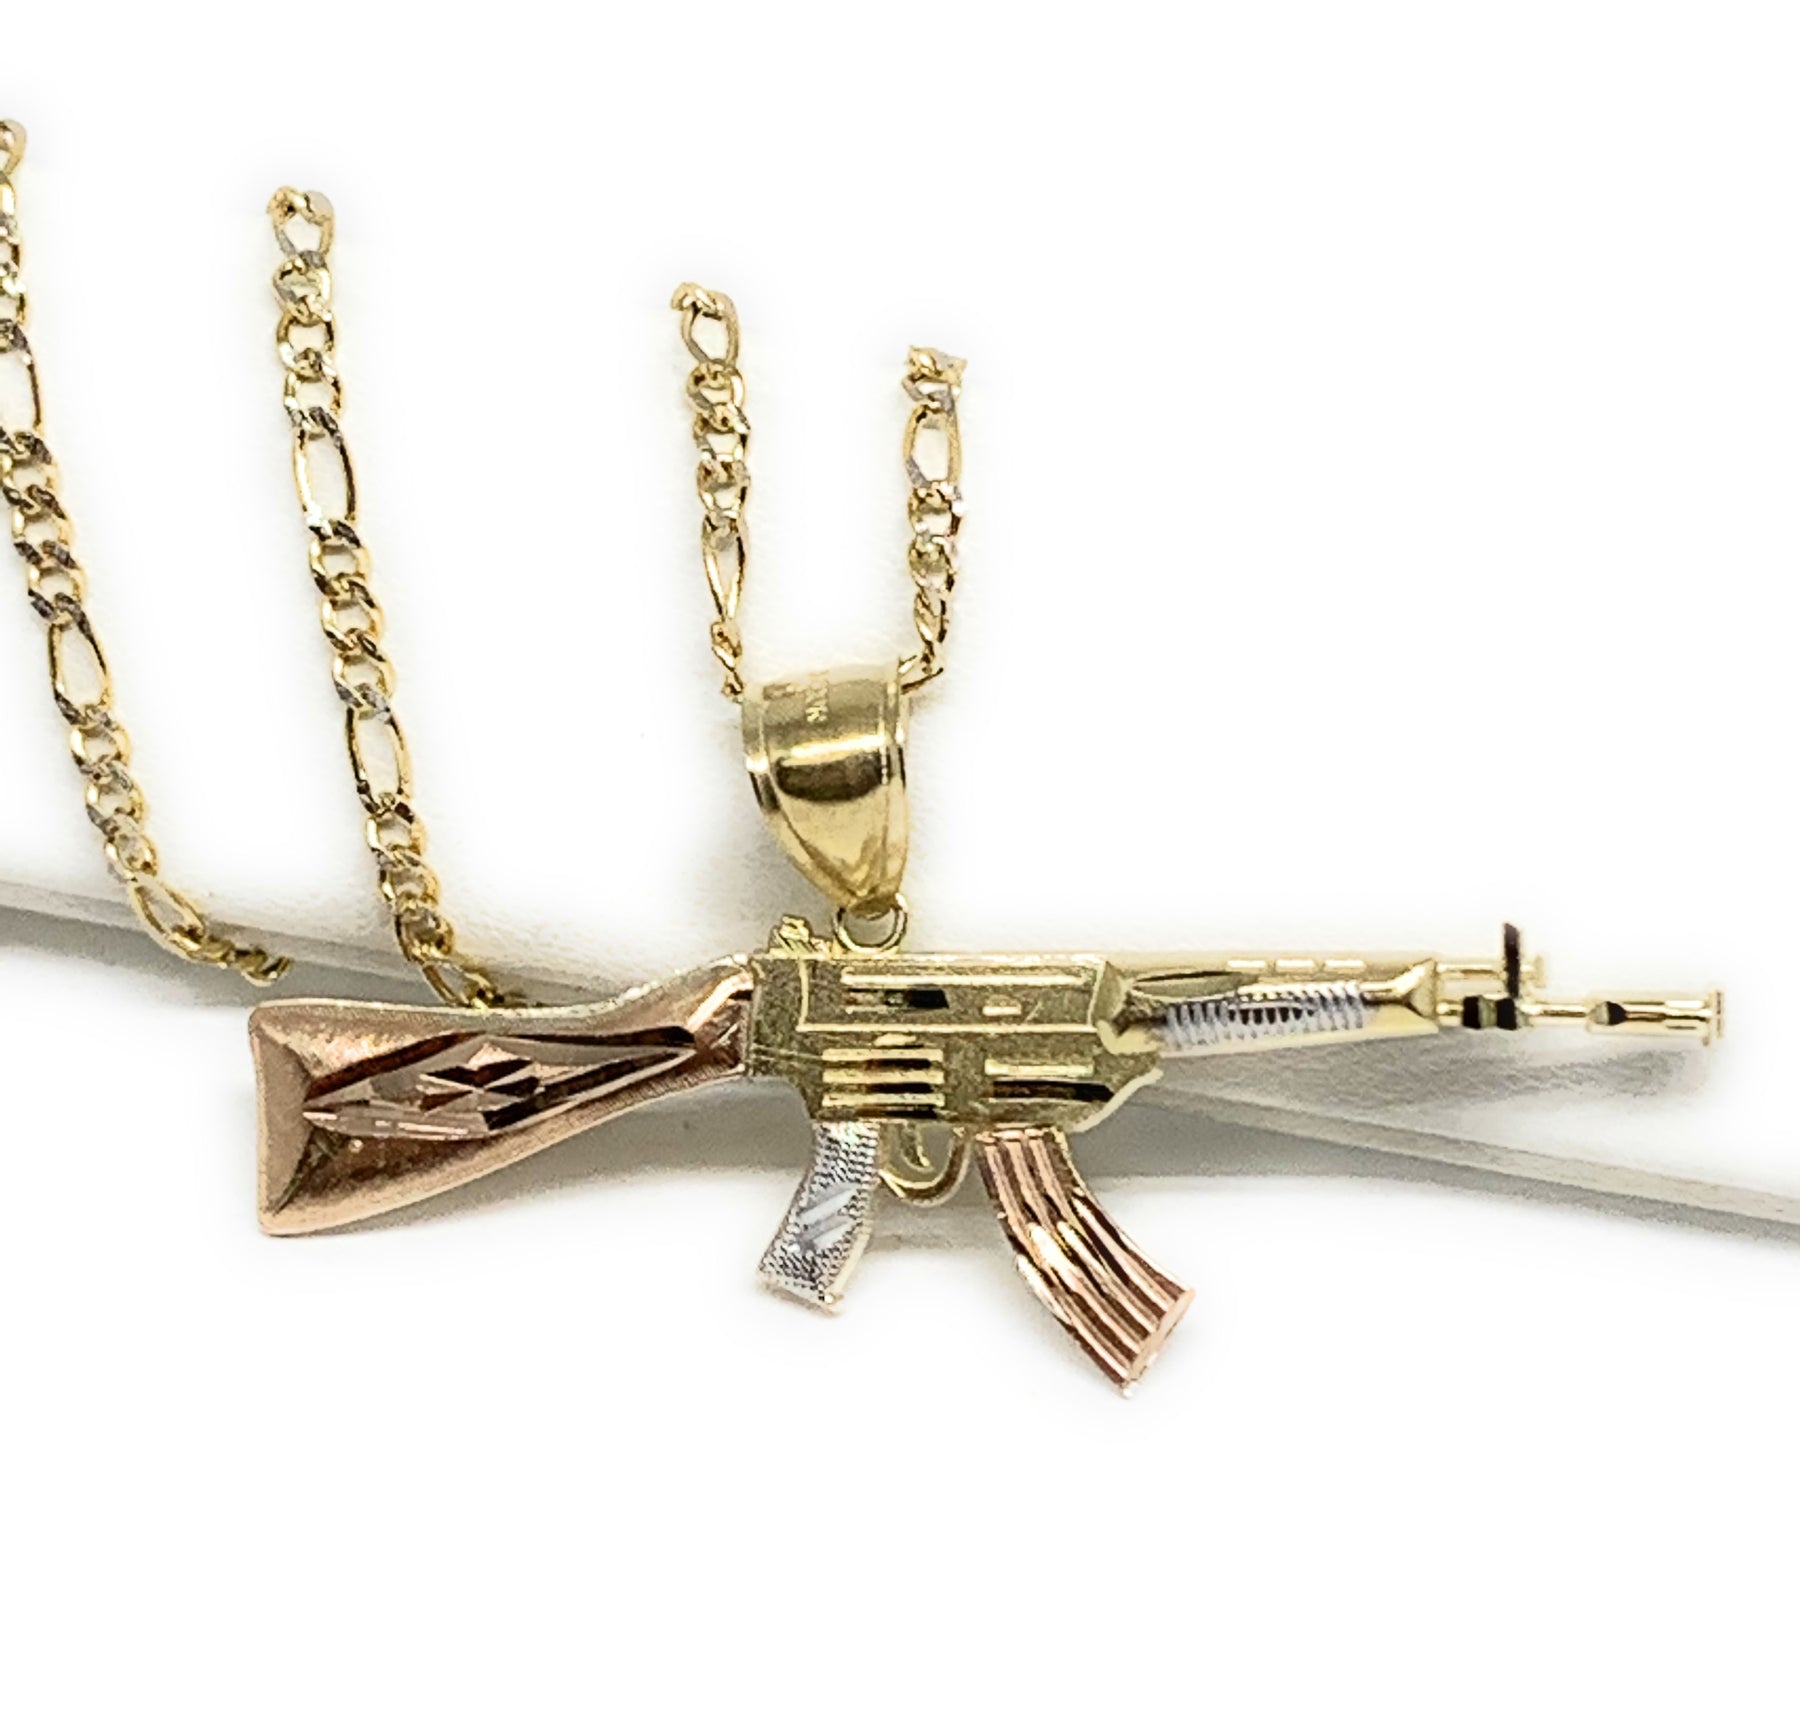 Hot-Selling New Hip-Hop Hiphop Jewelry Titanium Steel Gold-Plated Diamond  Revenge Angel Ak47 Pendant Spt2617 - China Jewelry and Body Jewelry price |  Made-in-China.com